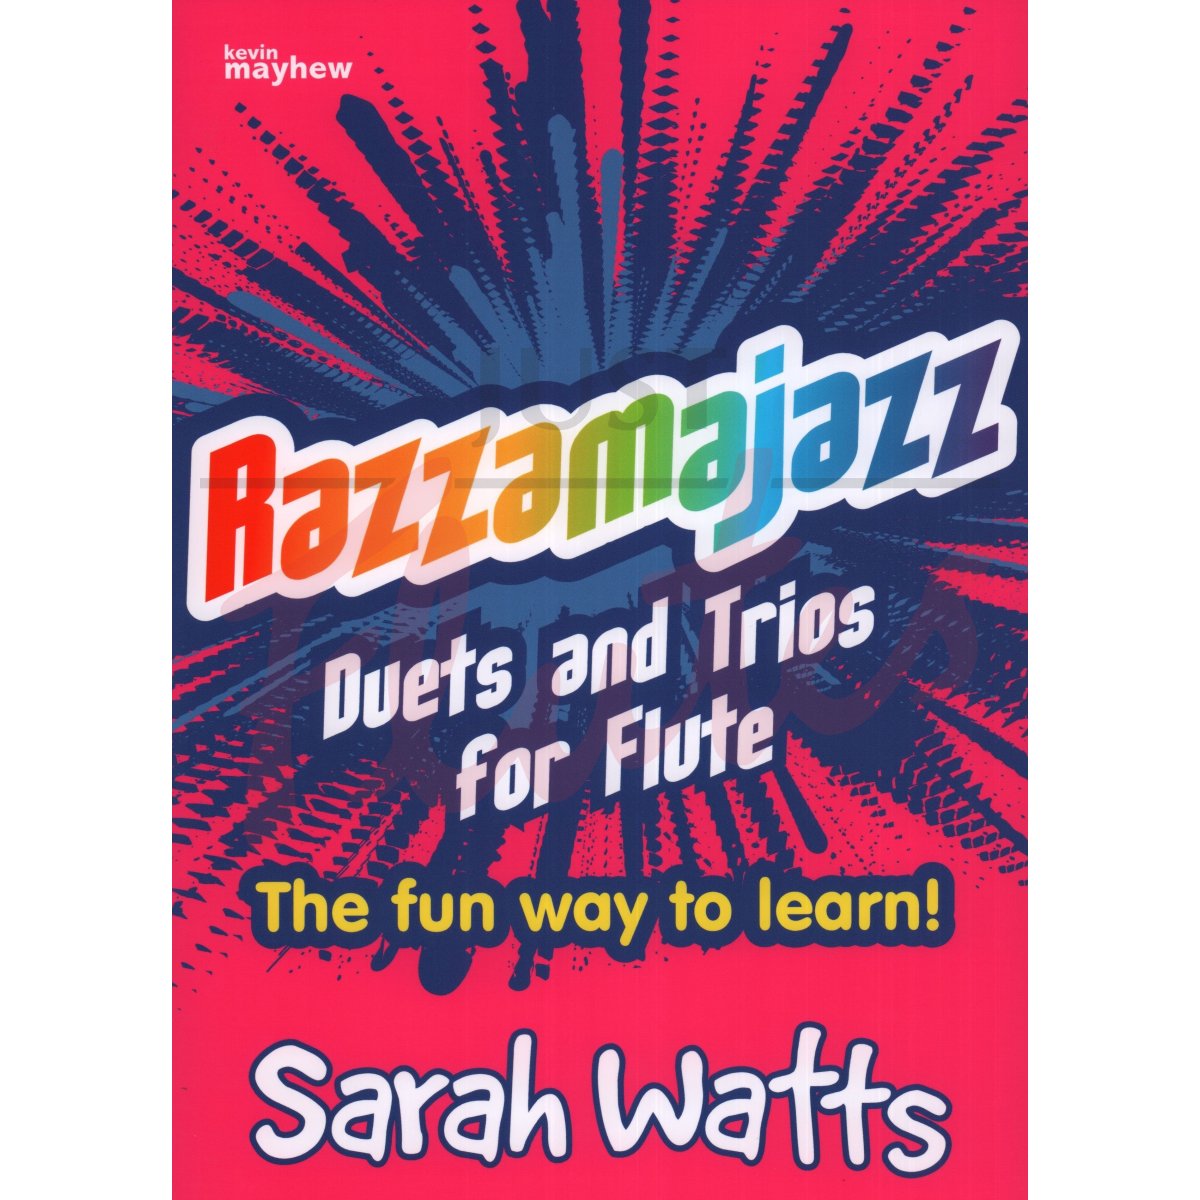 Razzamajazz Duets and Trios for Flute